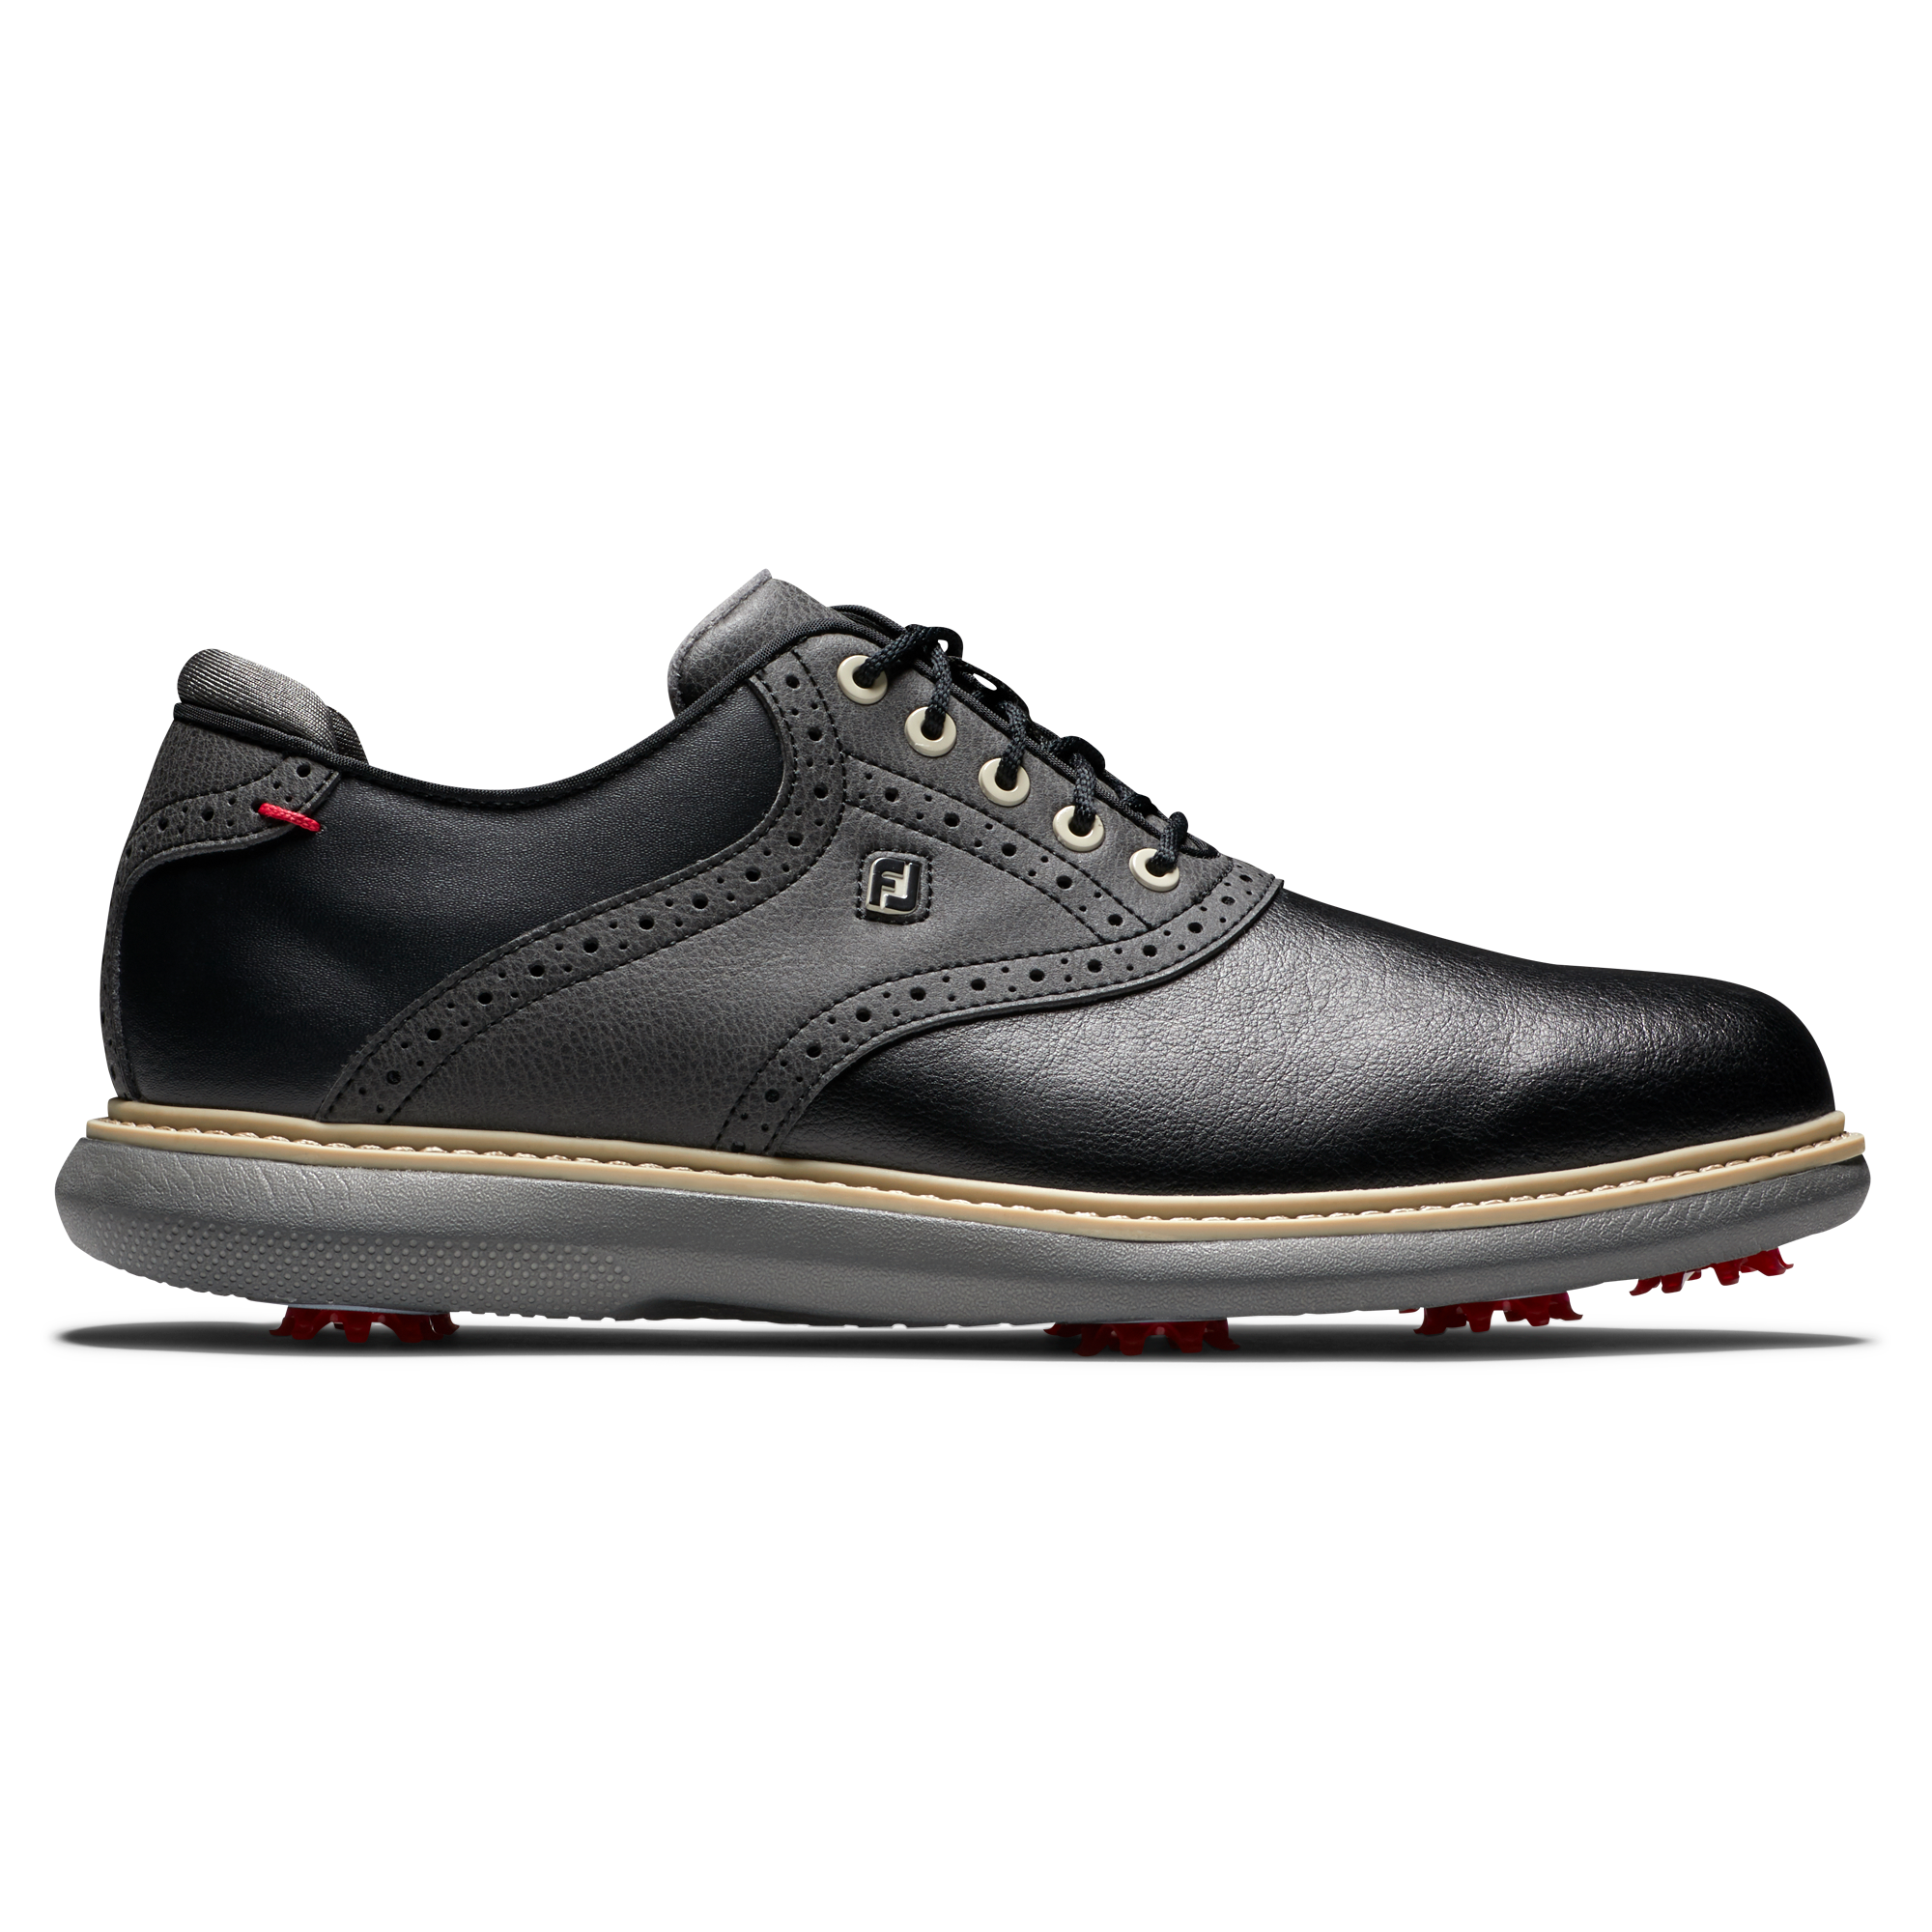 Traditionally Styled Golf Shoe, FJ Traditions Mens